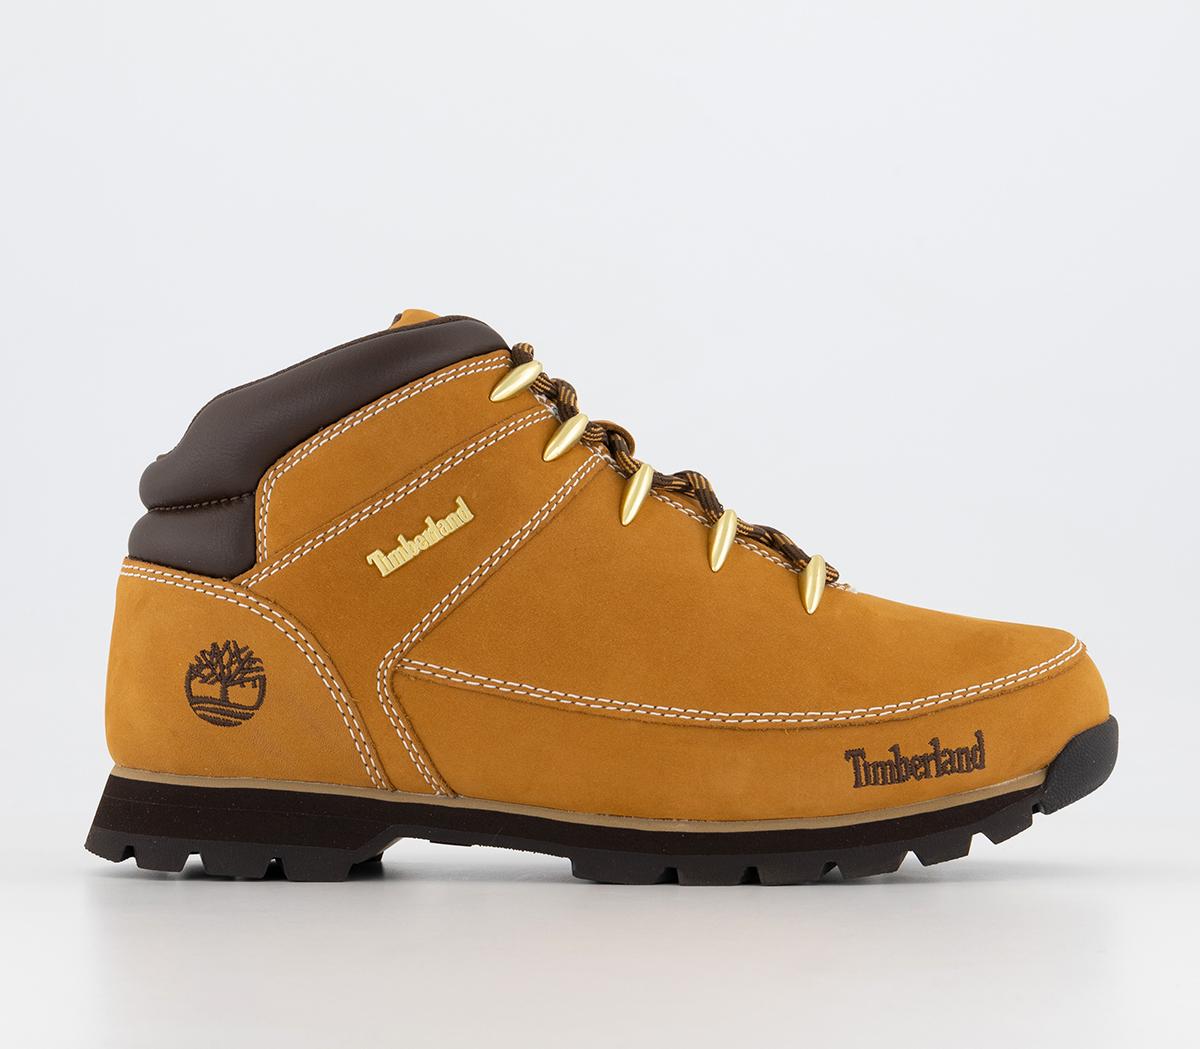 Timberland Eurosprint Mid Hiker Boots Wheat - Men's Casual Shoes